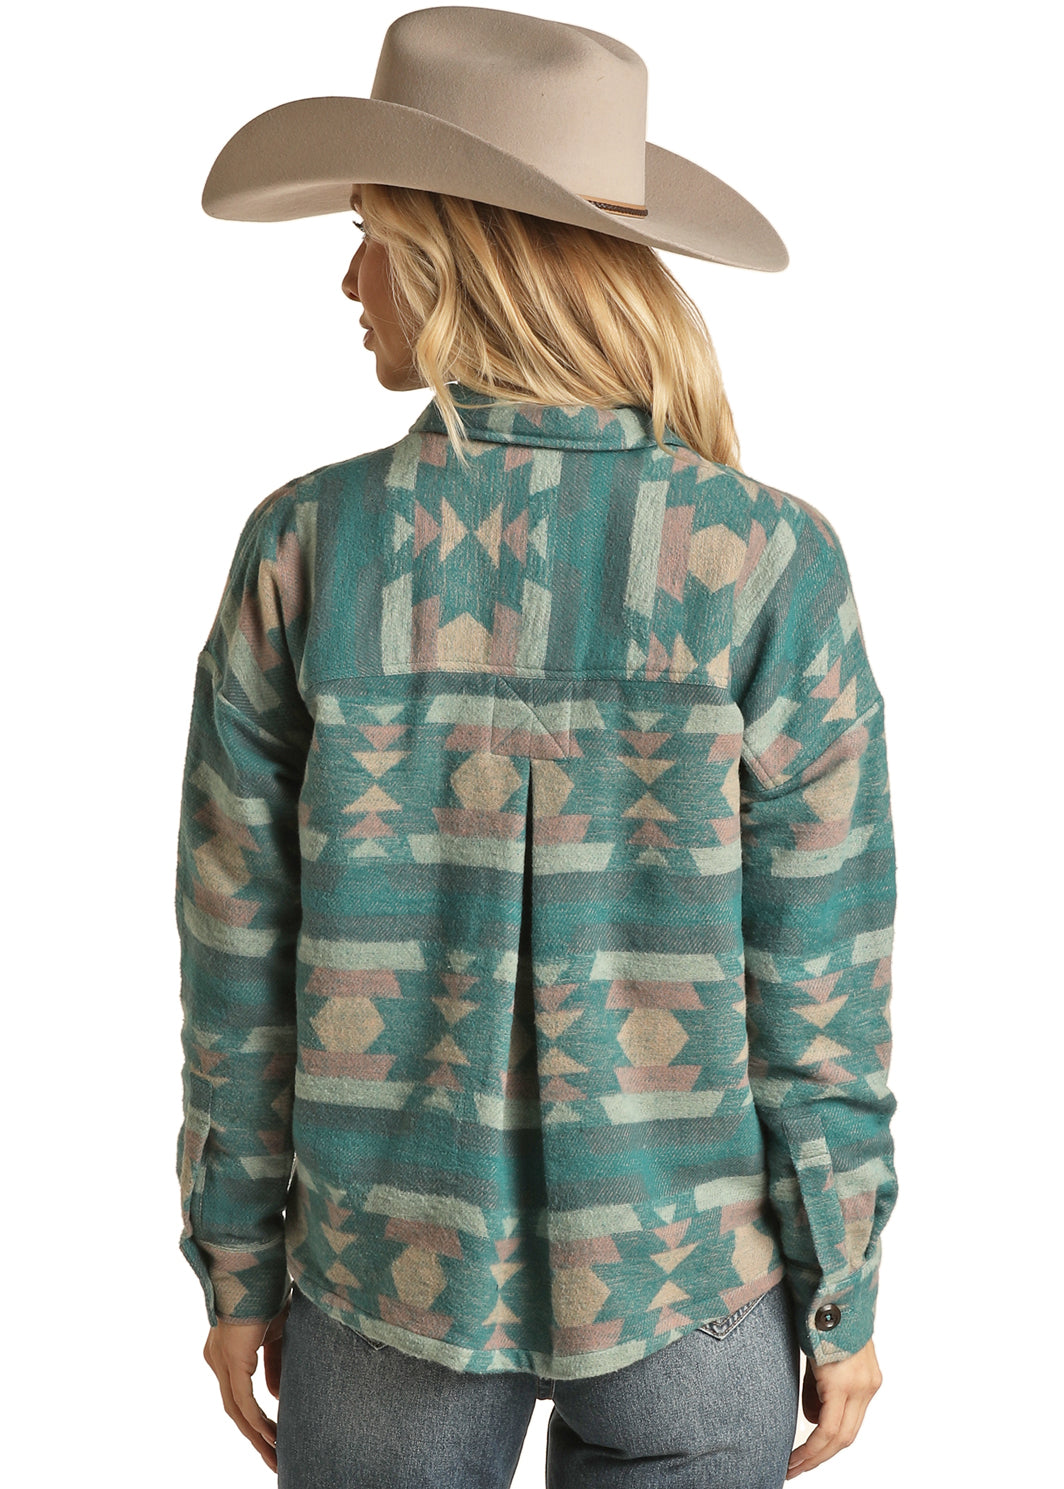 ROCK & ROLL COWGIRL WOMEN'S BOXY FIT SHIRT JACKET - TEAL